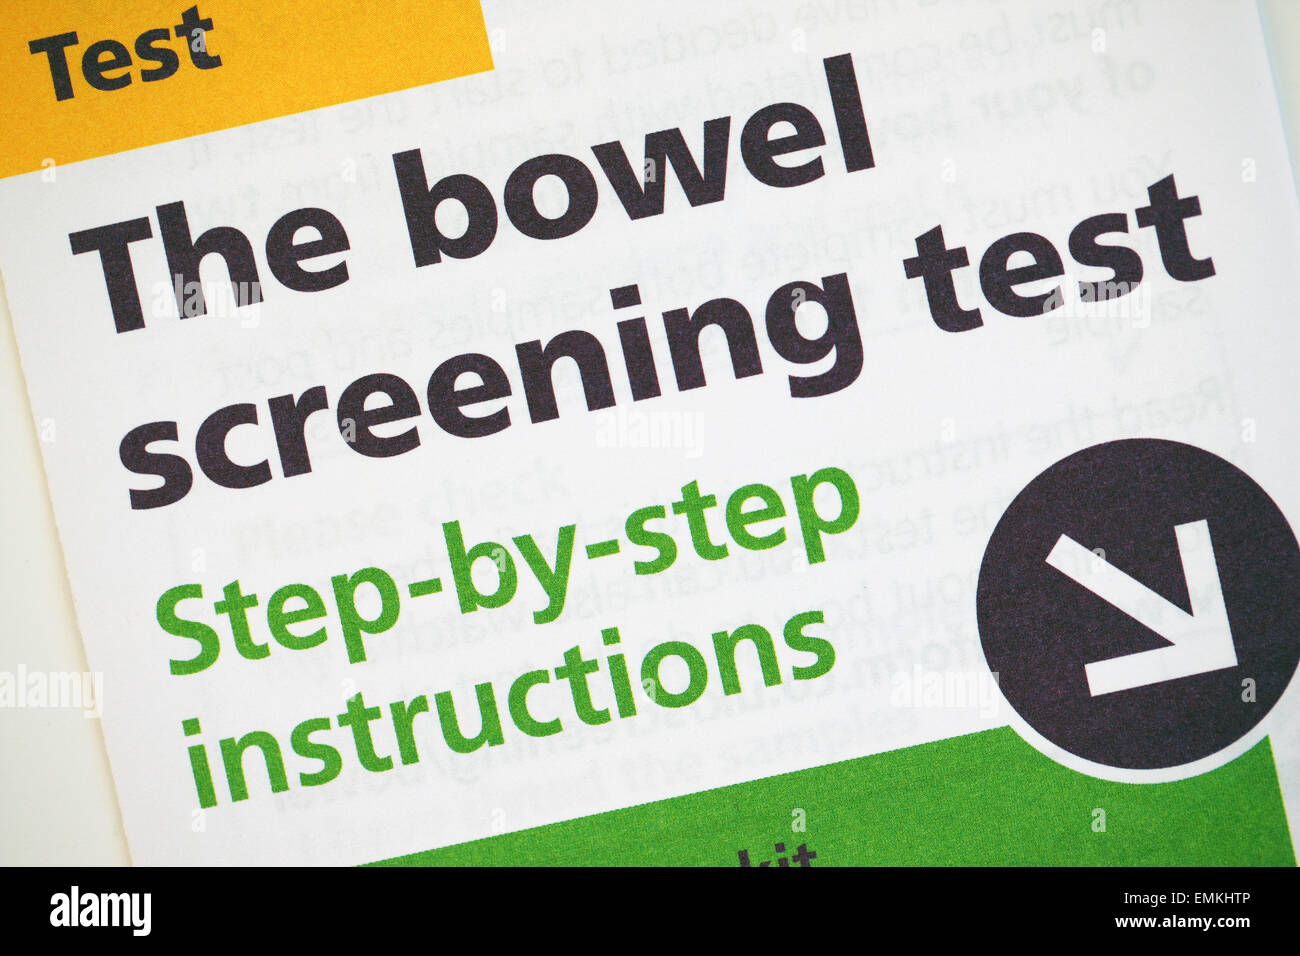 Leaflet advising how to under take the bowel cancer screening test. Stock Photo